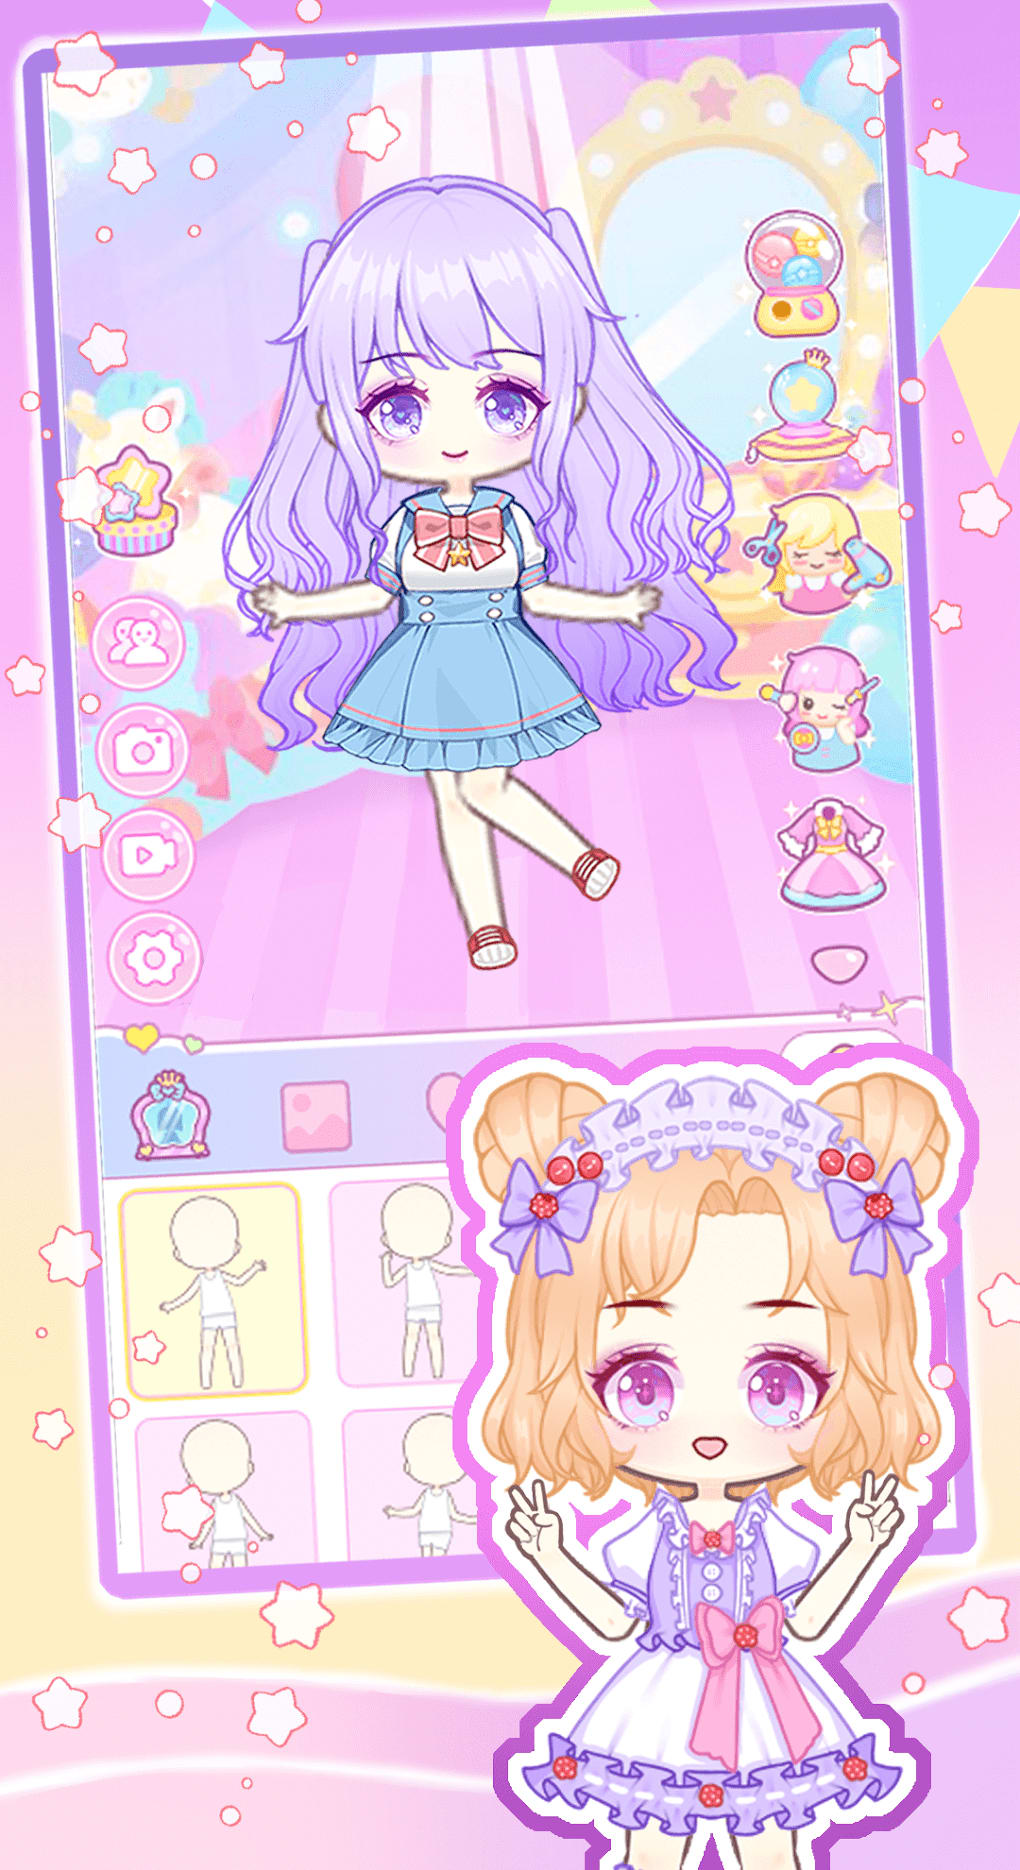 Anime Dress Up Games For Girls  Apps on Google Play